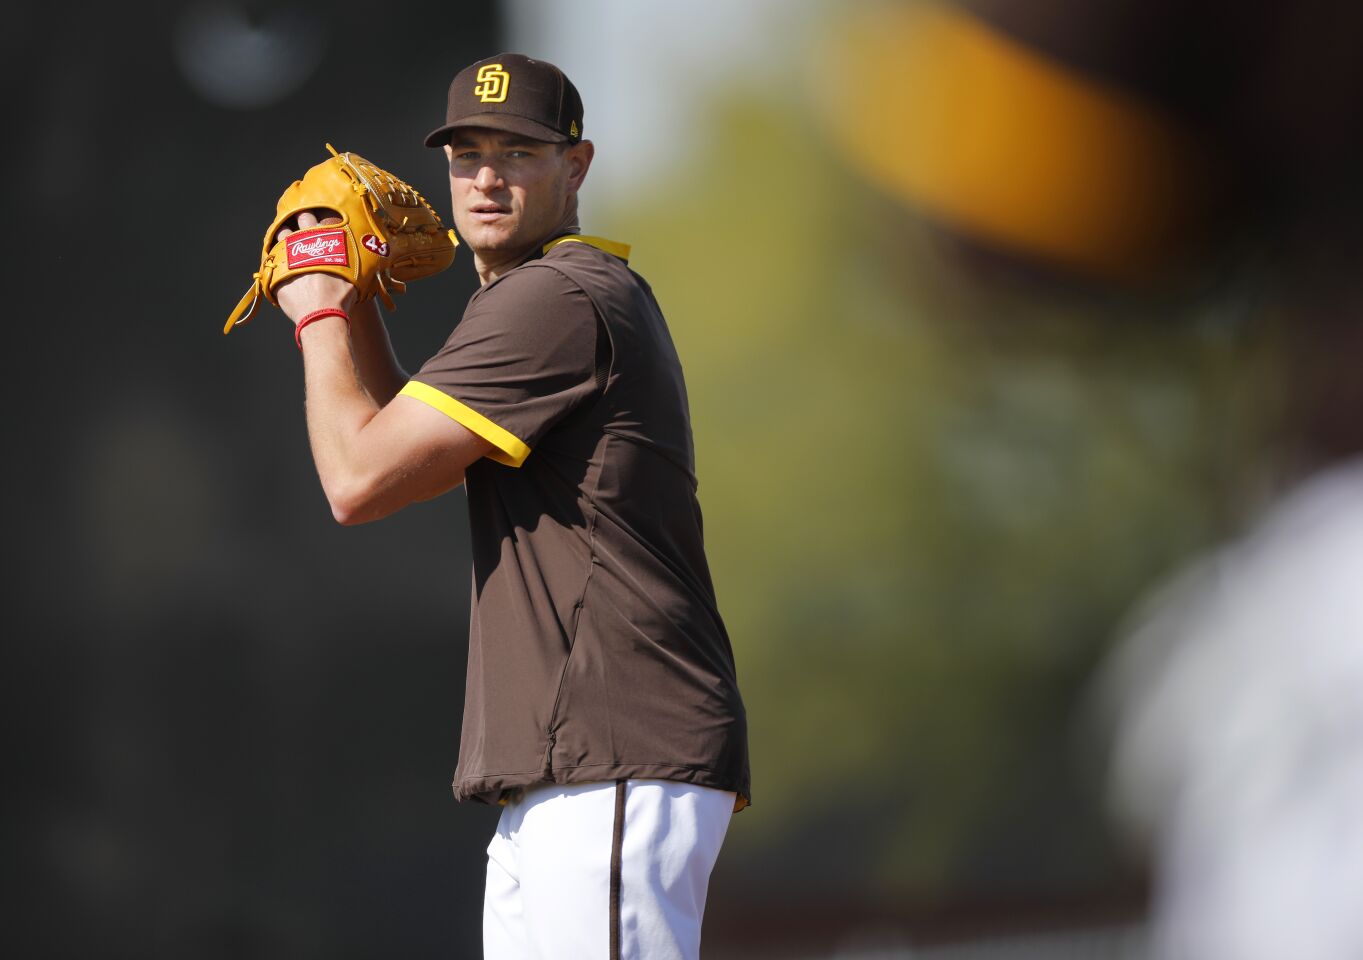 San Diego Padres Garrett Richards works out during a spring training practice on Feb. 18, 2020.